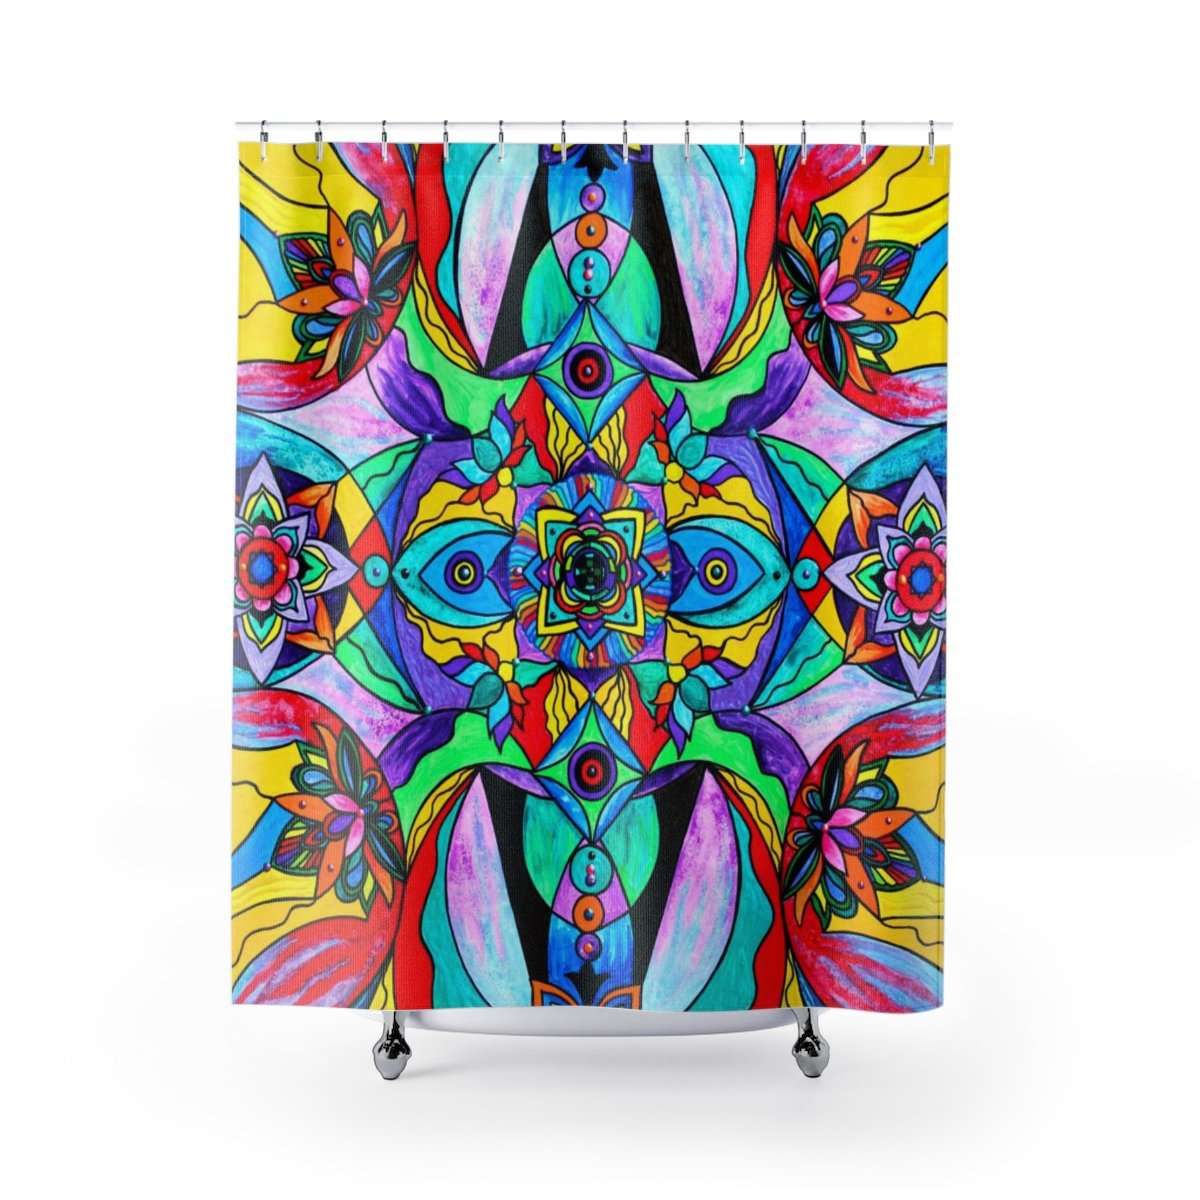 Receive - Shower Curtains